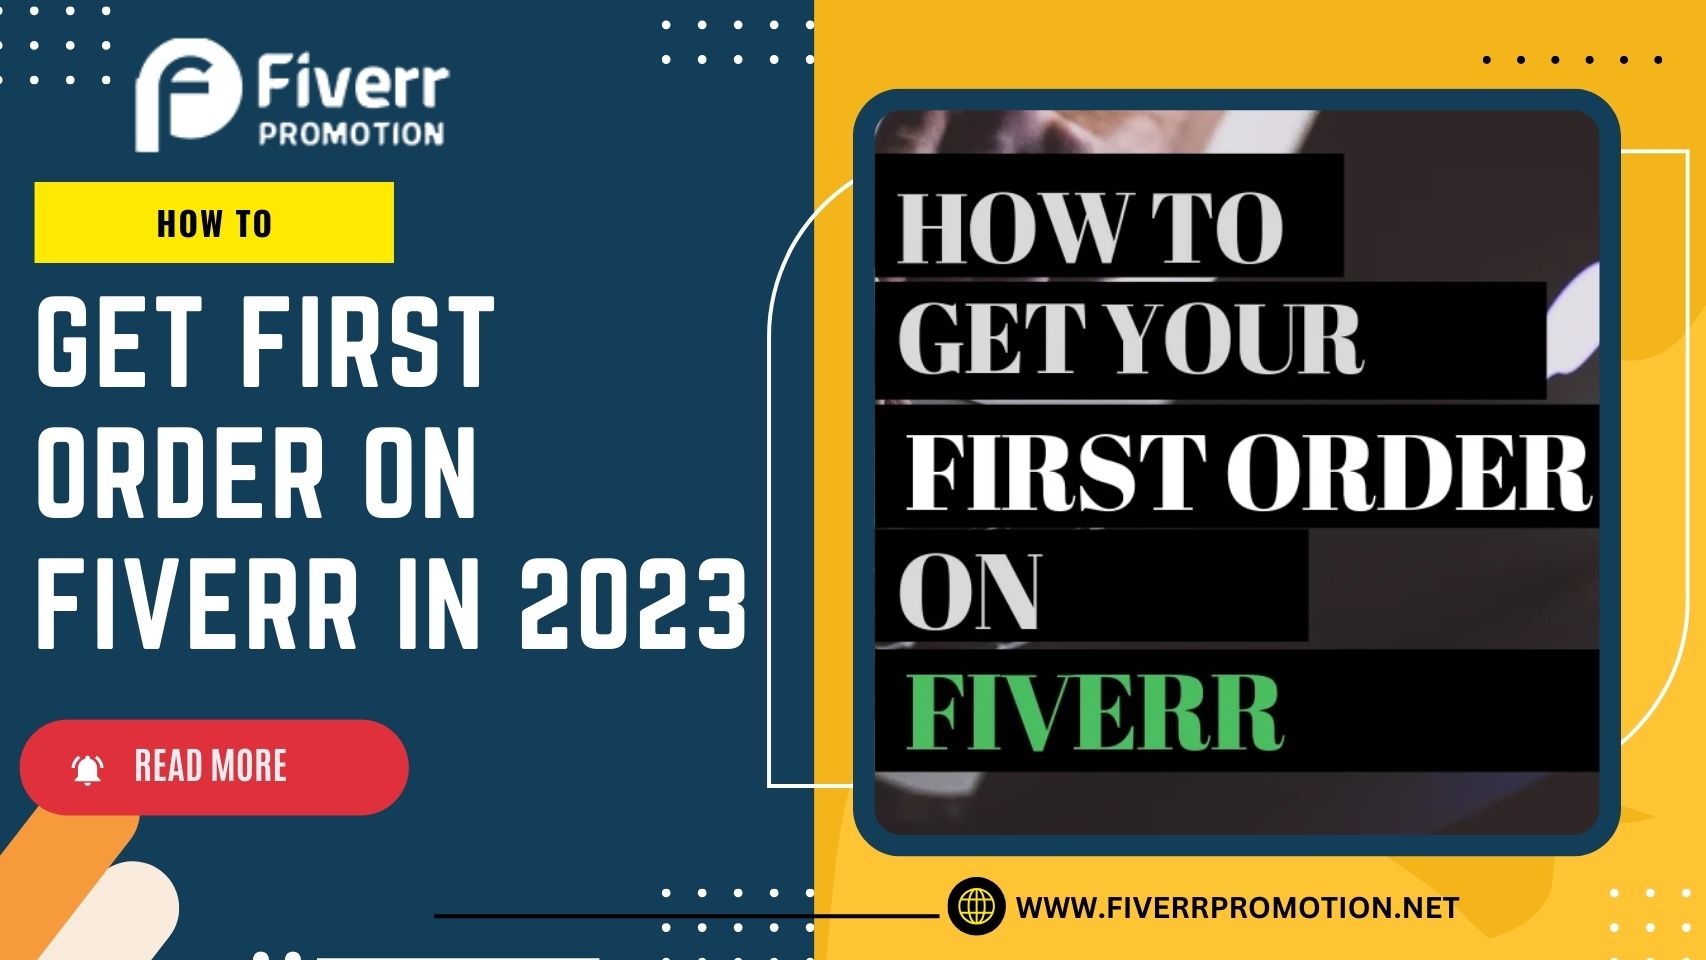 How to Get First Order on Fiverr in 2023